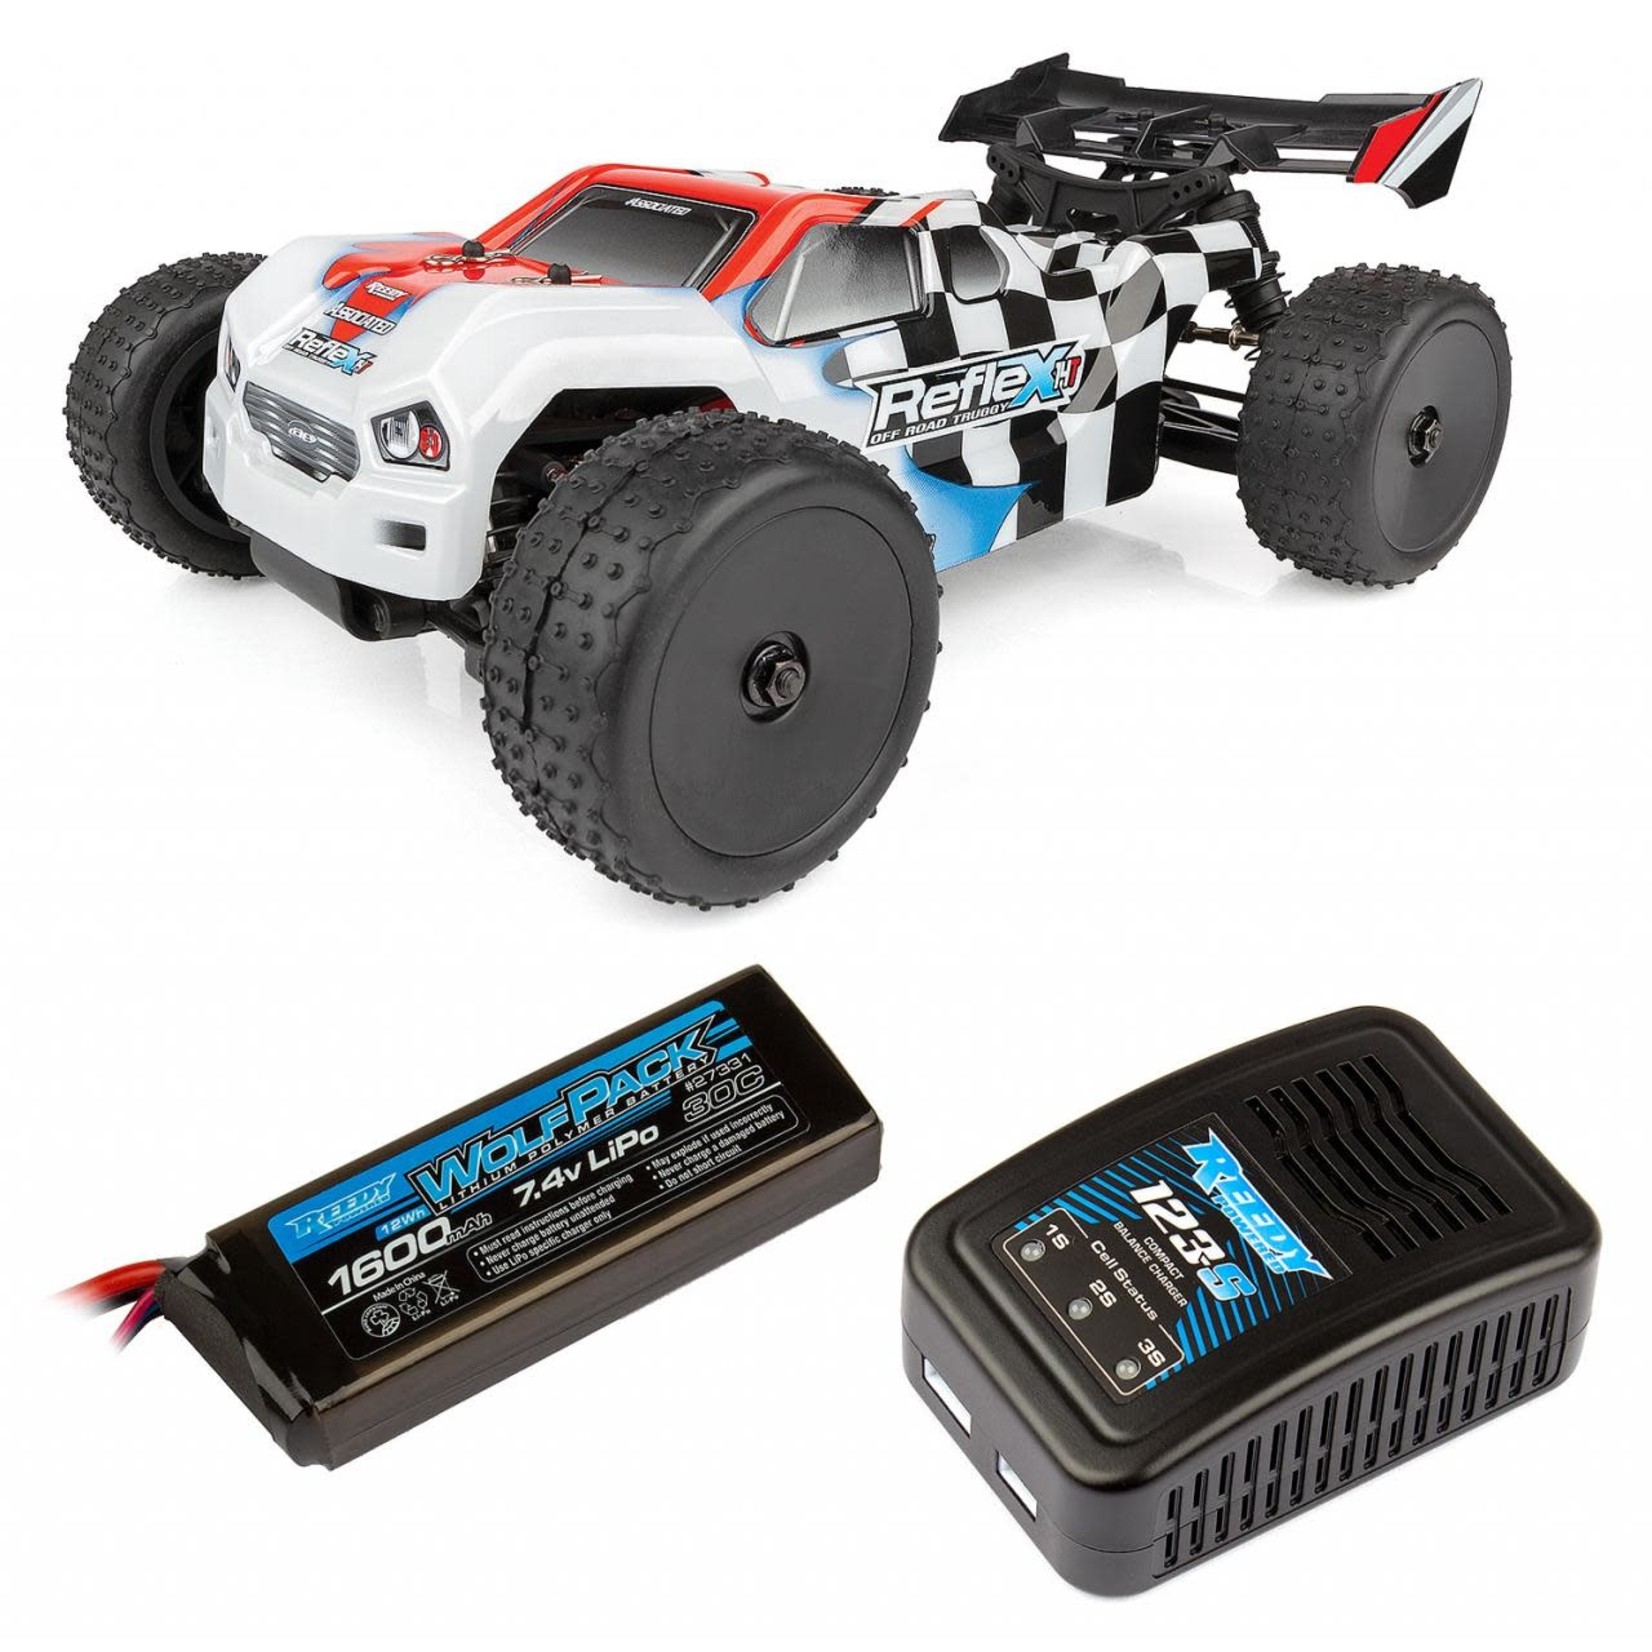 Team Associated Team Associated 20176C Reflex 14T RTR 1/14 Scale 4WD Truggy Combo w/2.4GHz Radio, Battery & Charger